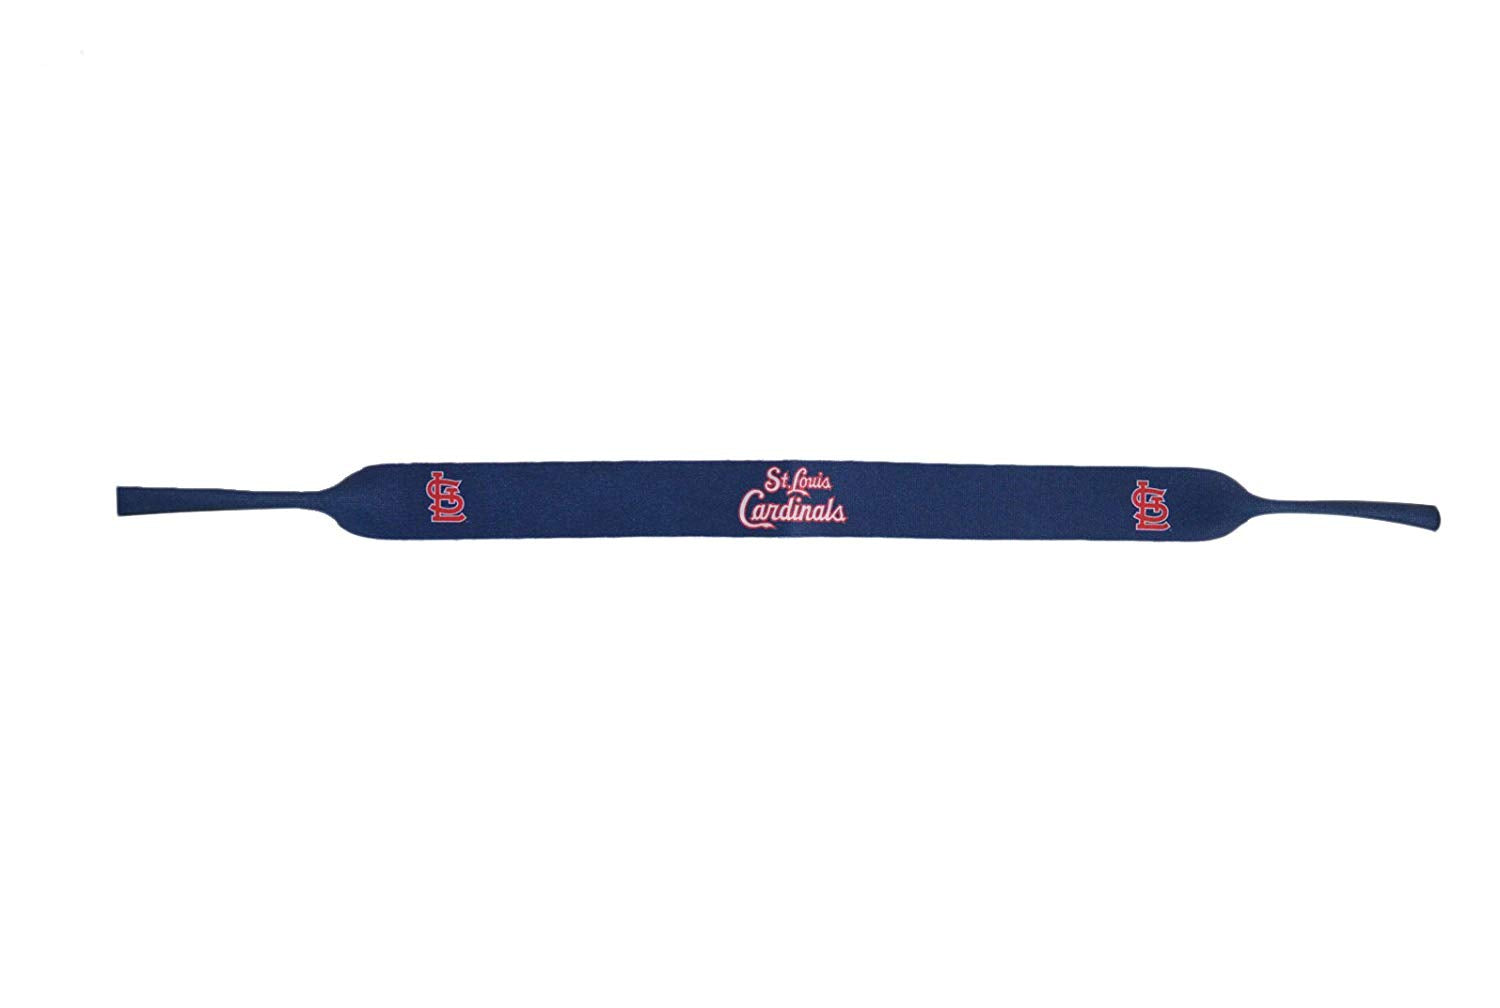 Siskiyou Sports Inc Official Major League Baseball Fan Shop Authentic Sunglasses and Neoprene MLB Team Strap. Enjoy Tailgating and The Game in The Sun with Cool Specs